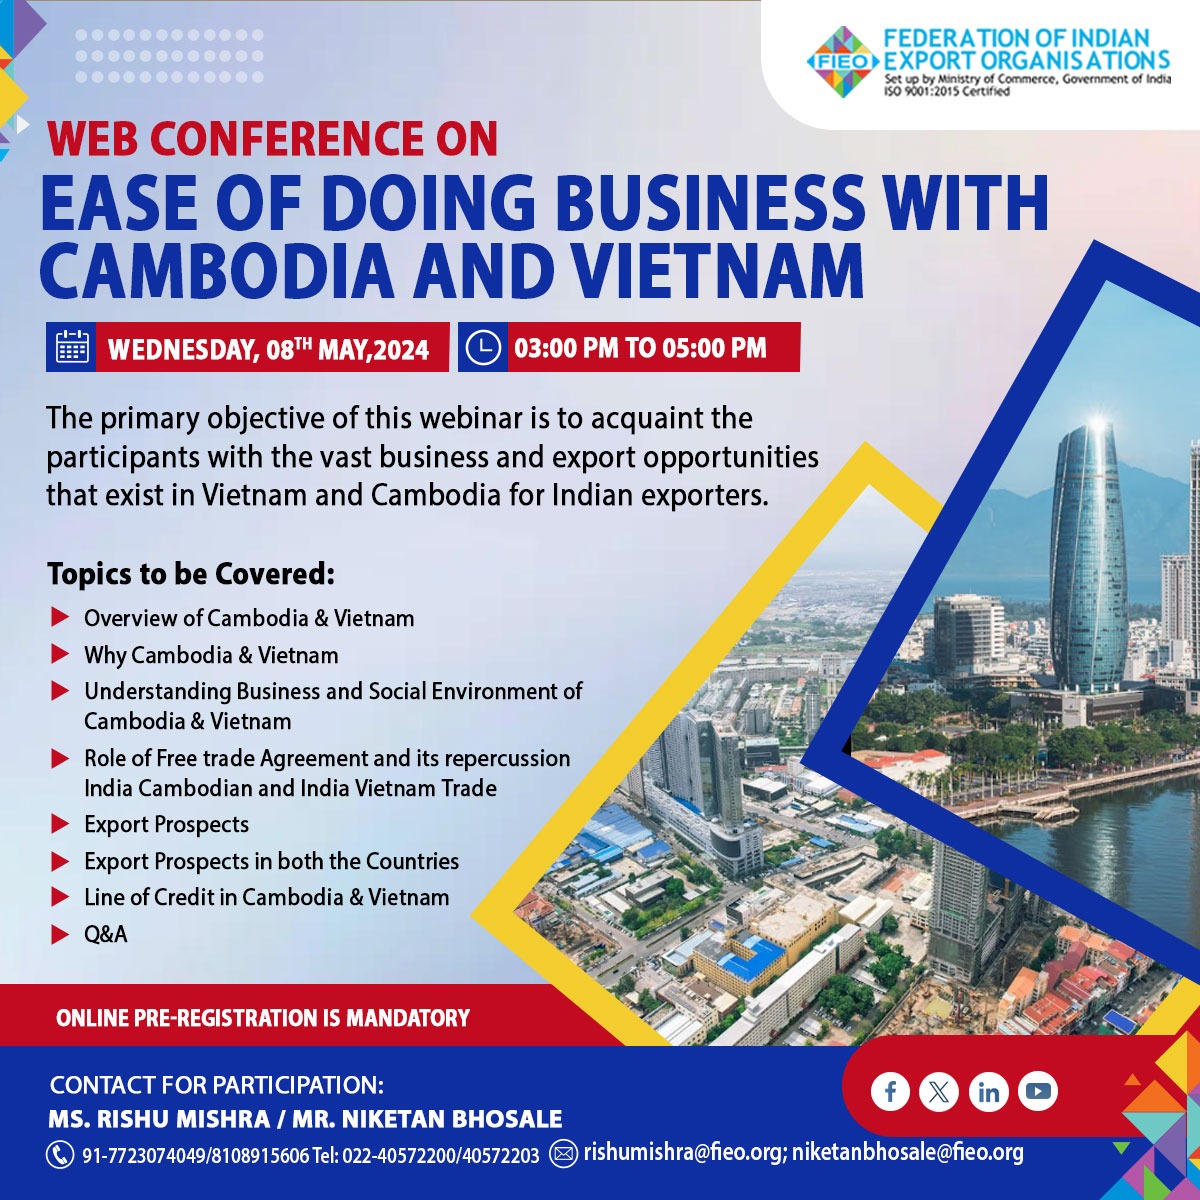 🌐 Join FIEO's Web Conference on Ease of Doing Business with Cambodia & Vietnam, May 8th, 3-5 PM. Explore trade opportunities, FTA impacts, Line of Credit and more!

Register now: fieo.org/EDBC
@AmbHanoi @indembcam @DoC_GoI @Brands_India @DelhiEmbassy